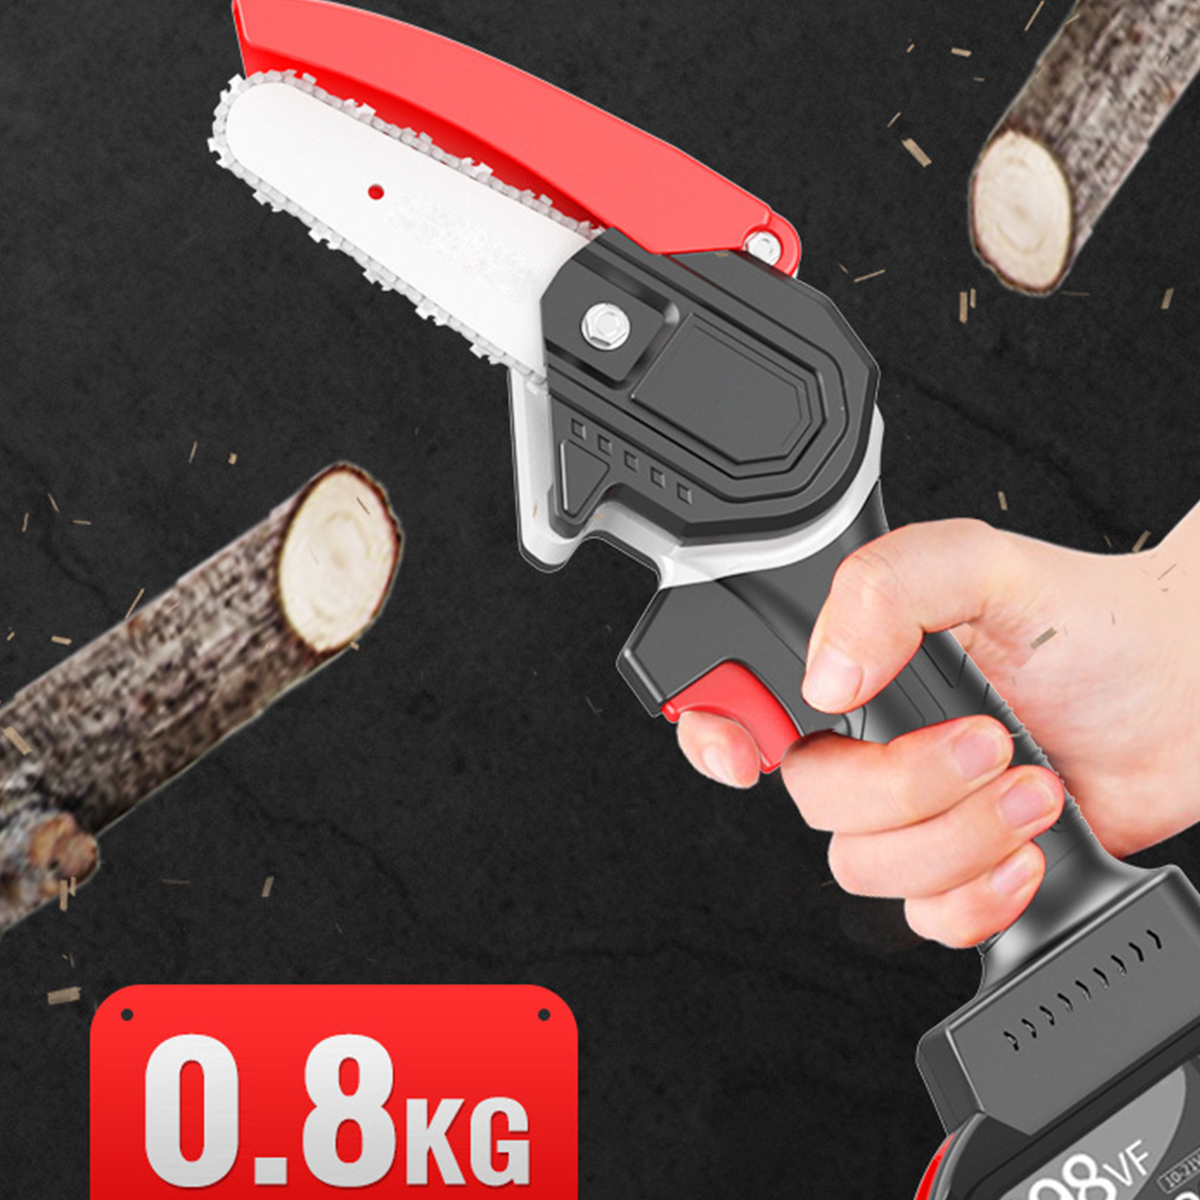 4-Inch-Mini-Cordless-Electric-Chain-Saw-One-Hand-Saw-Woodworking-Wood-Cutter-W-12-Battery-1879172-3